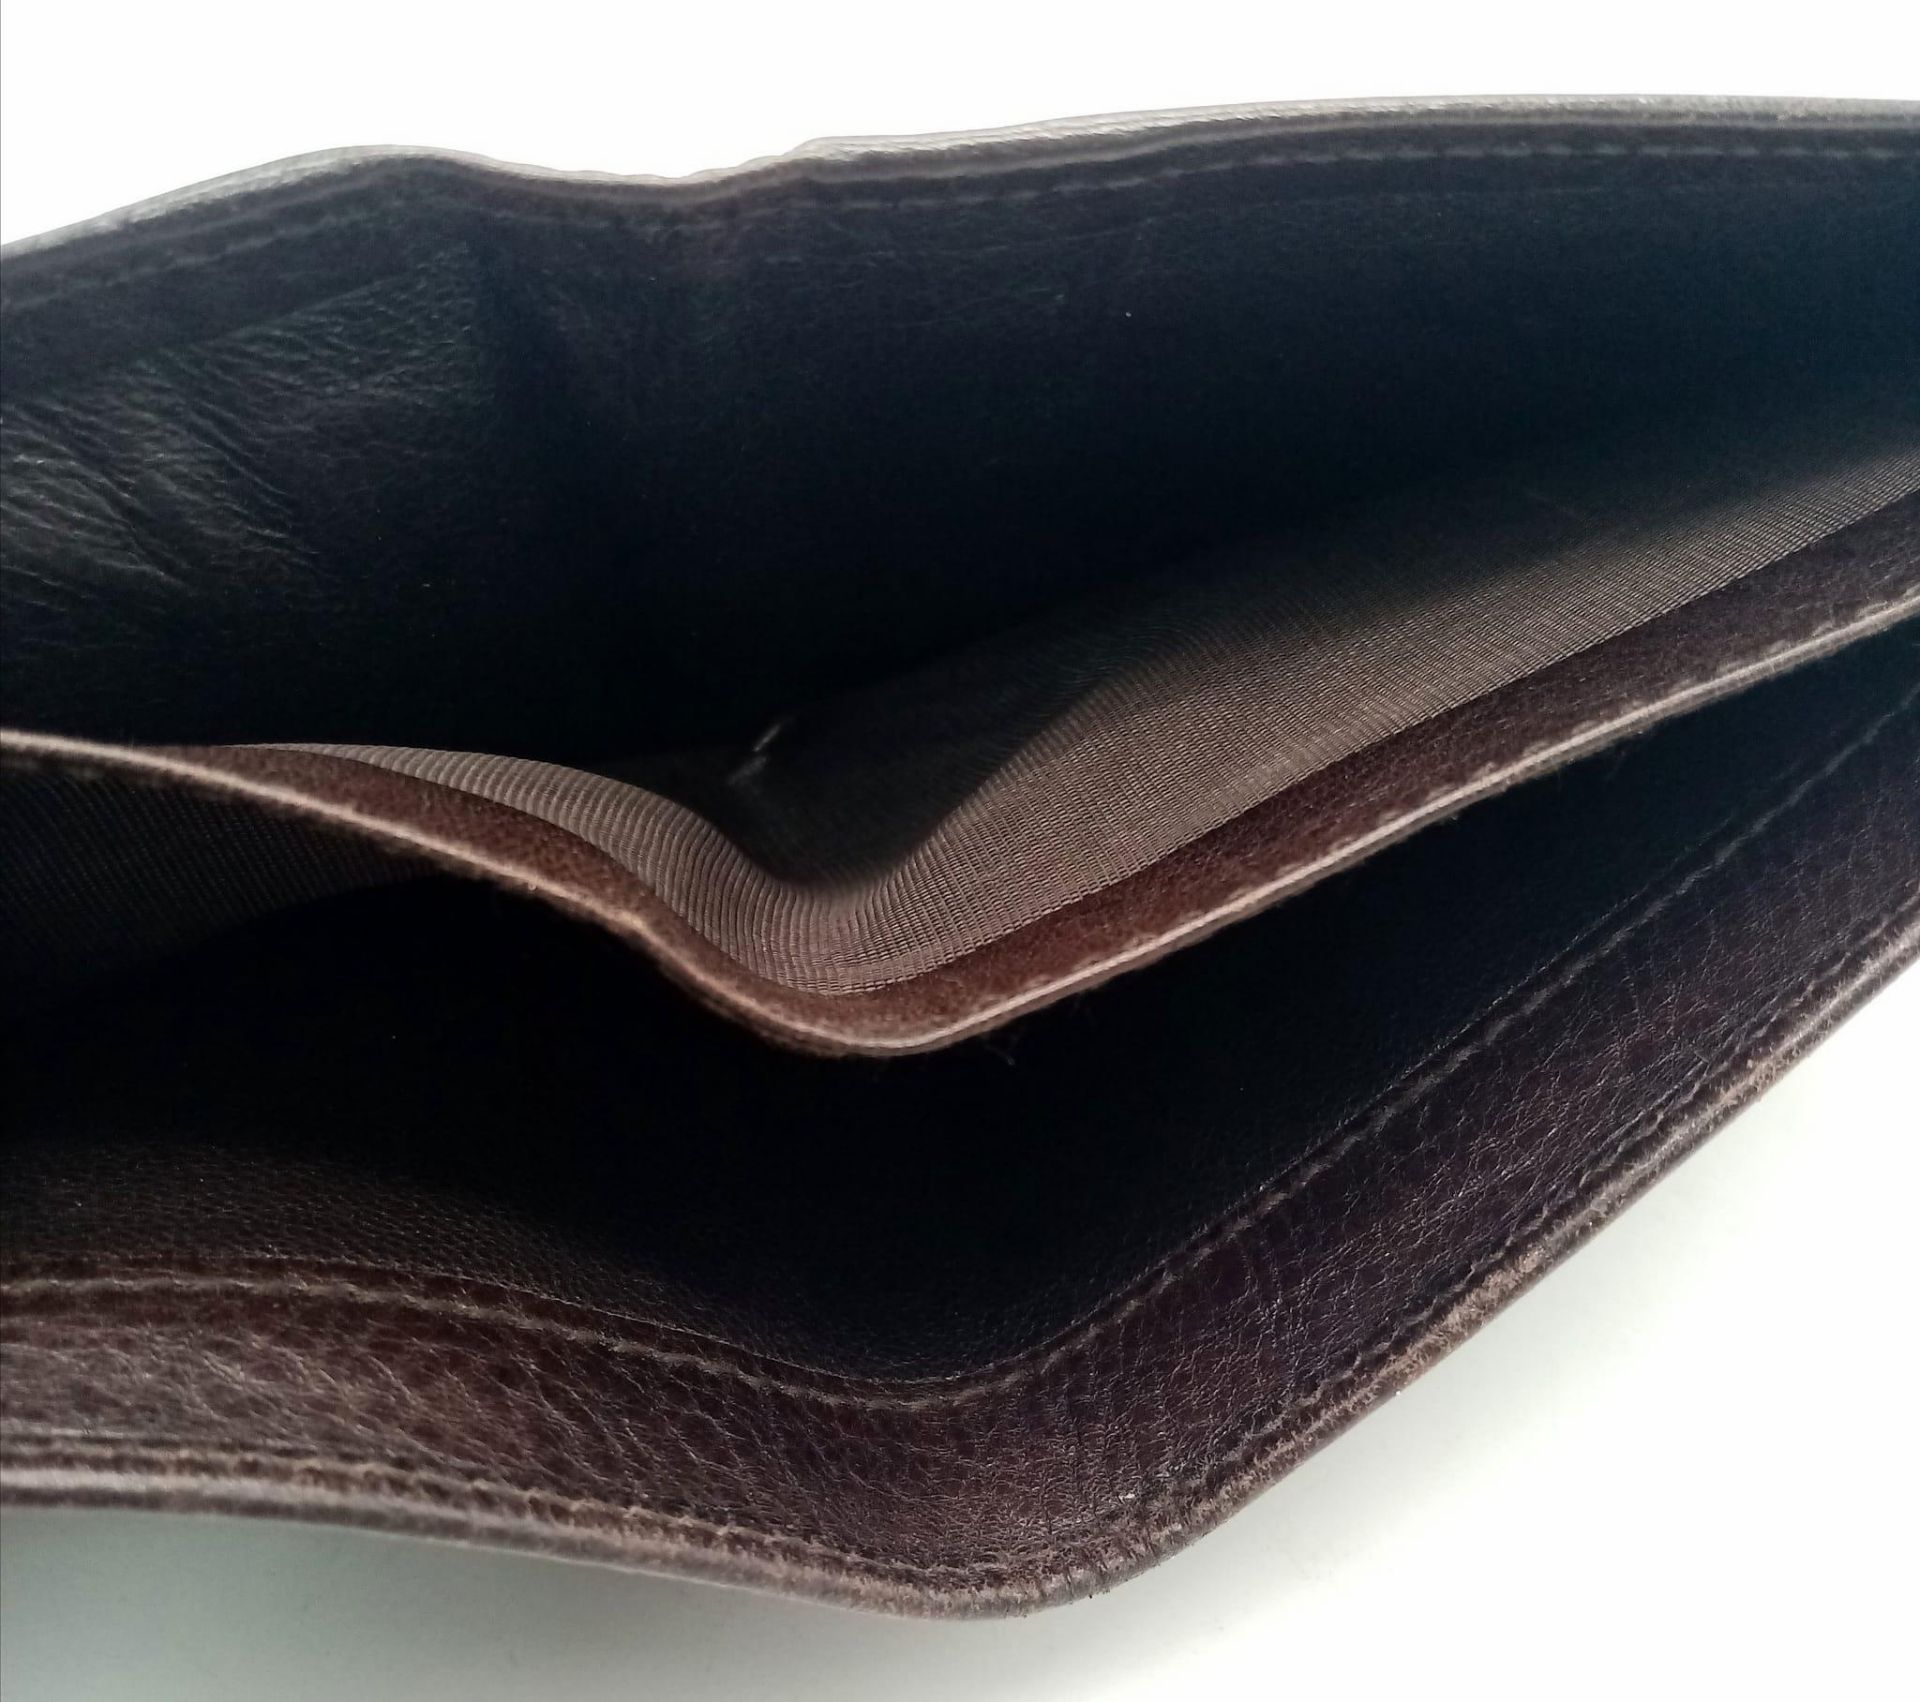 A dark brown leather Gucci card wallet, 3 card holders with a popper pocket. Size approx. - Image 4 of 6